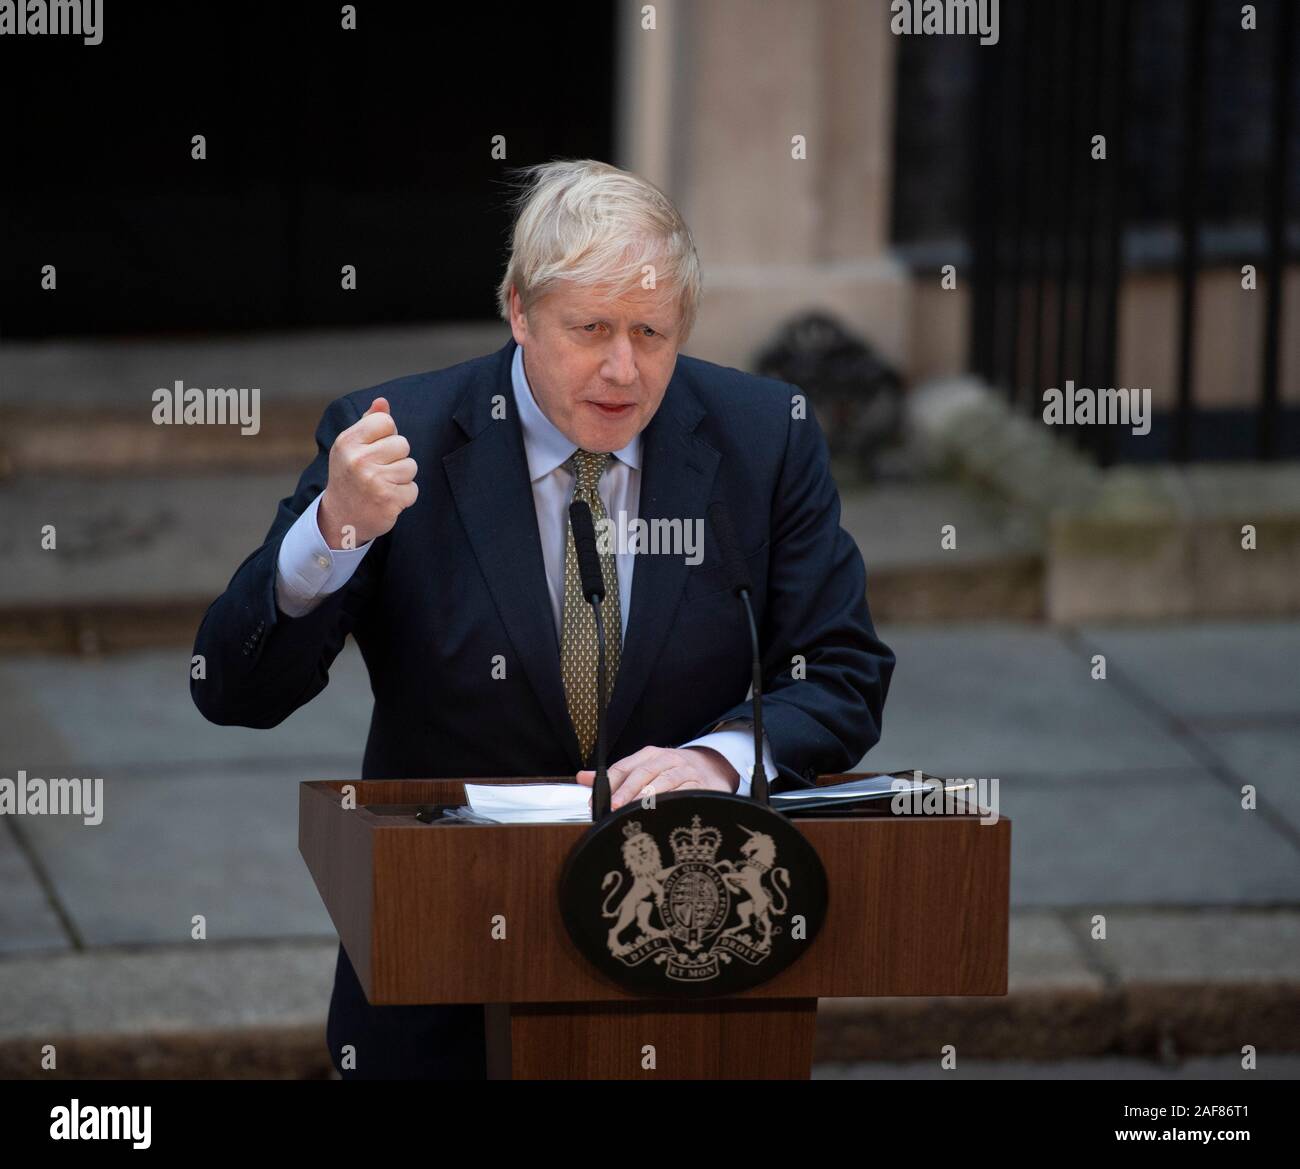 10 Downing Street, London, UK. 13th December 2019. Boris Johnson speaks outside 10 Downing Street after forming new government. Credit: Malcolm Park/Alamy Live News. Stock Photo